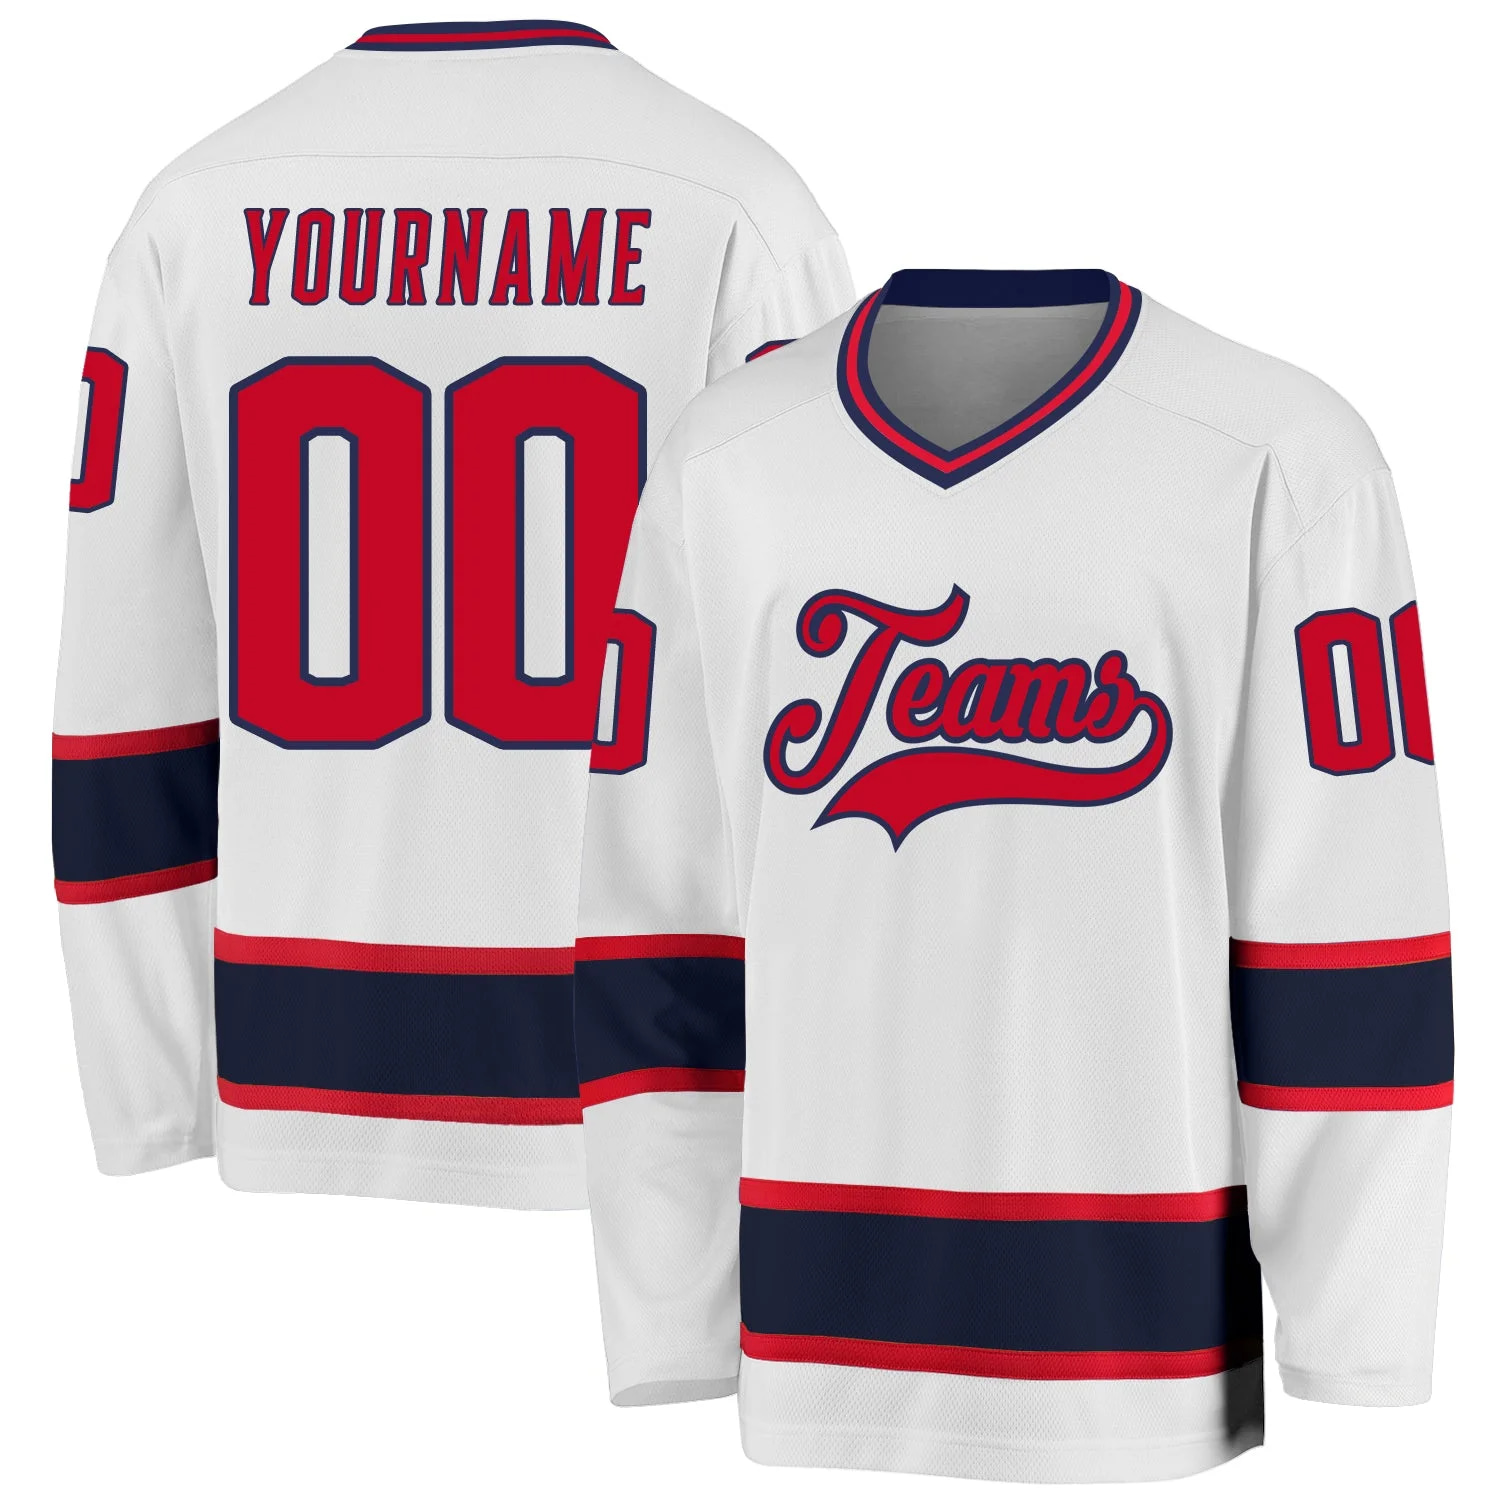 Stitched And Print White Red-navy Hockey Jersey Custom